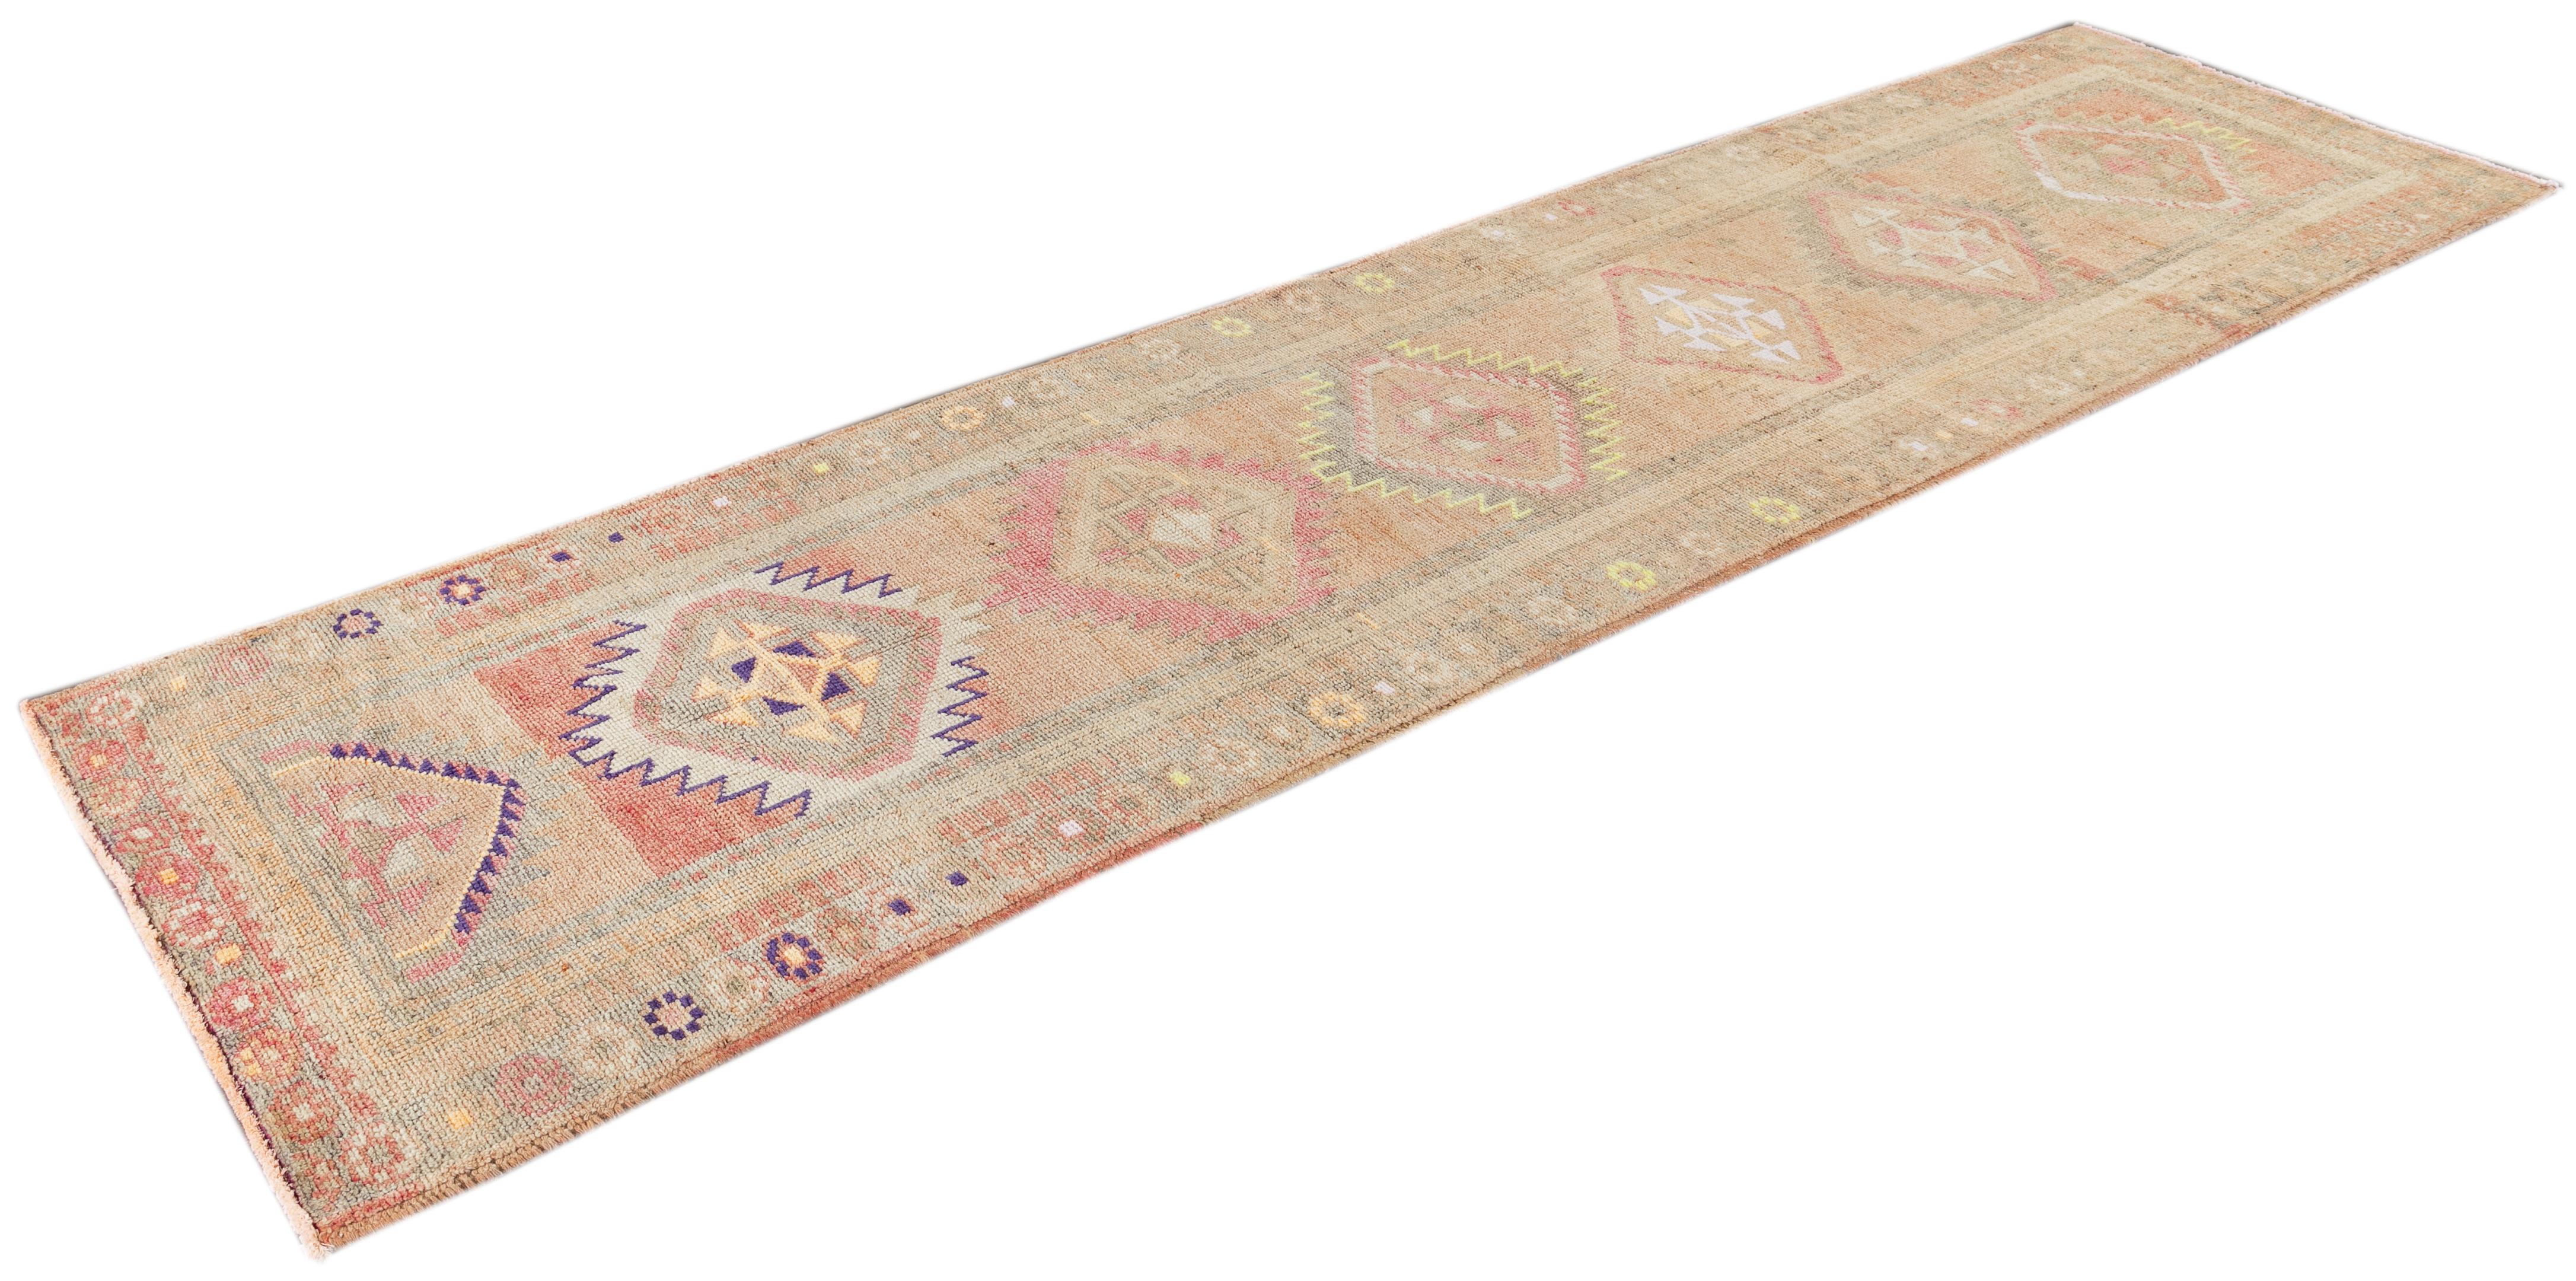 Beautiful Anatolian Village runner rug, hand knotted wool with a tan field, ivory, pink and gray accents with an allover geometric medallion design.

This rug measures 3' 2